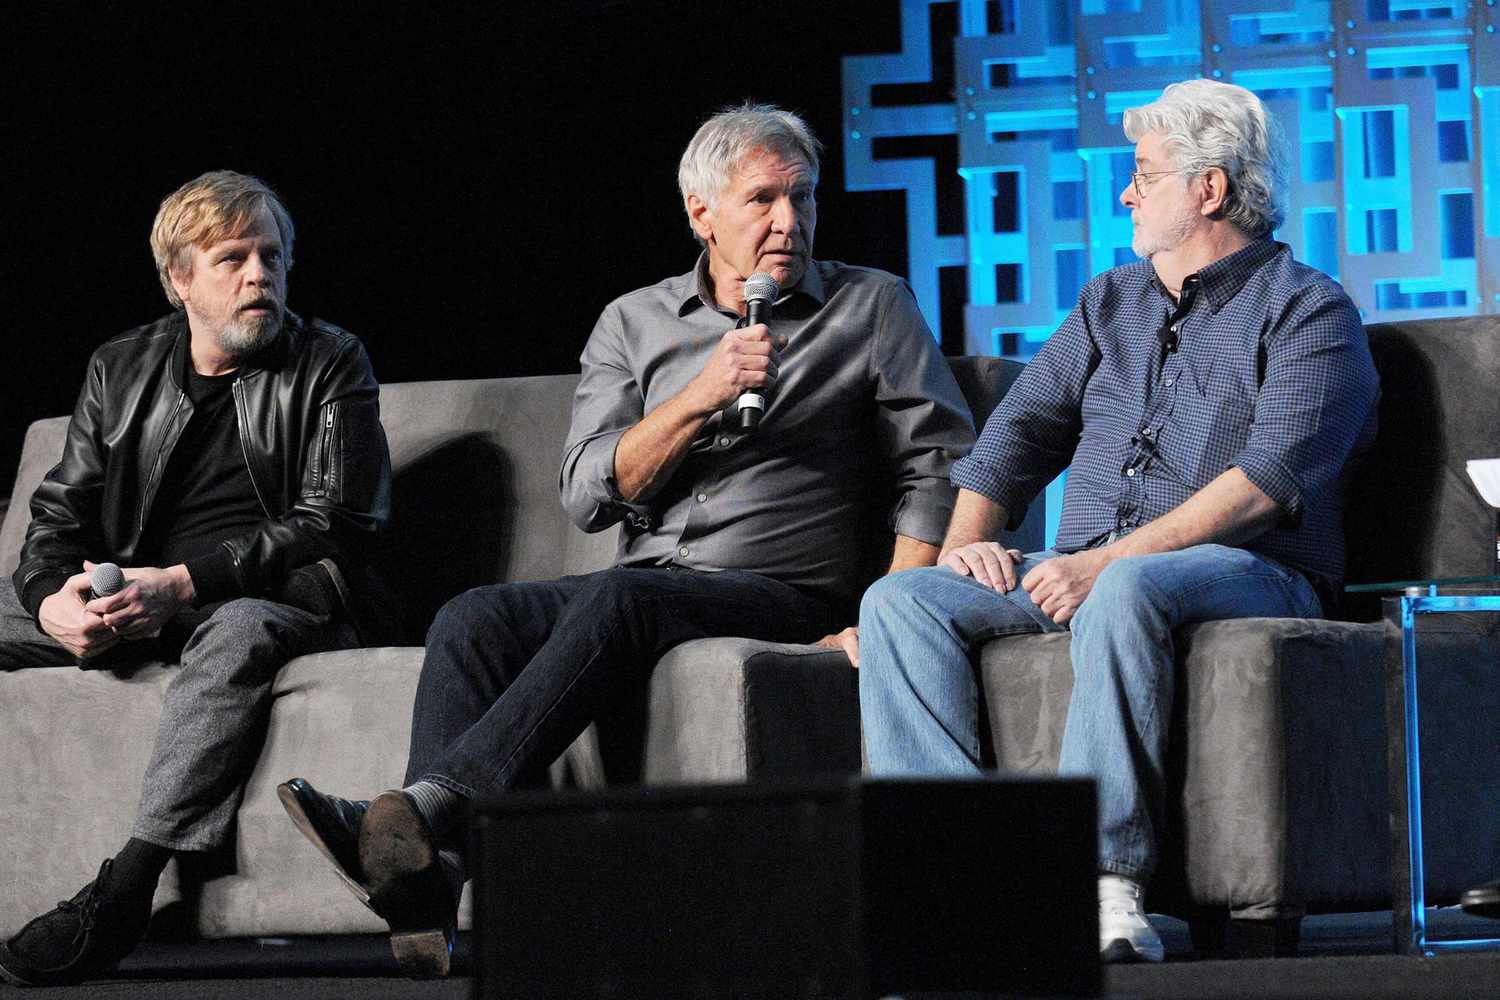 40 Years of Star Wars Panel at the 2017 Star Wars Celebration